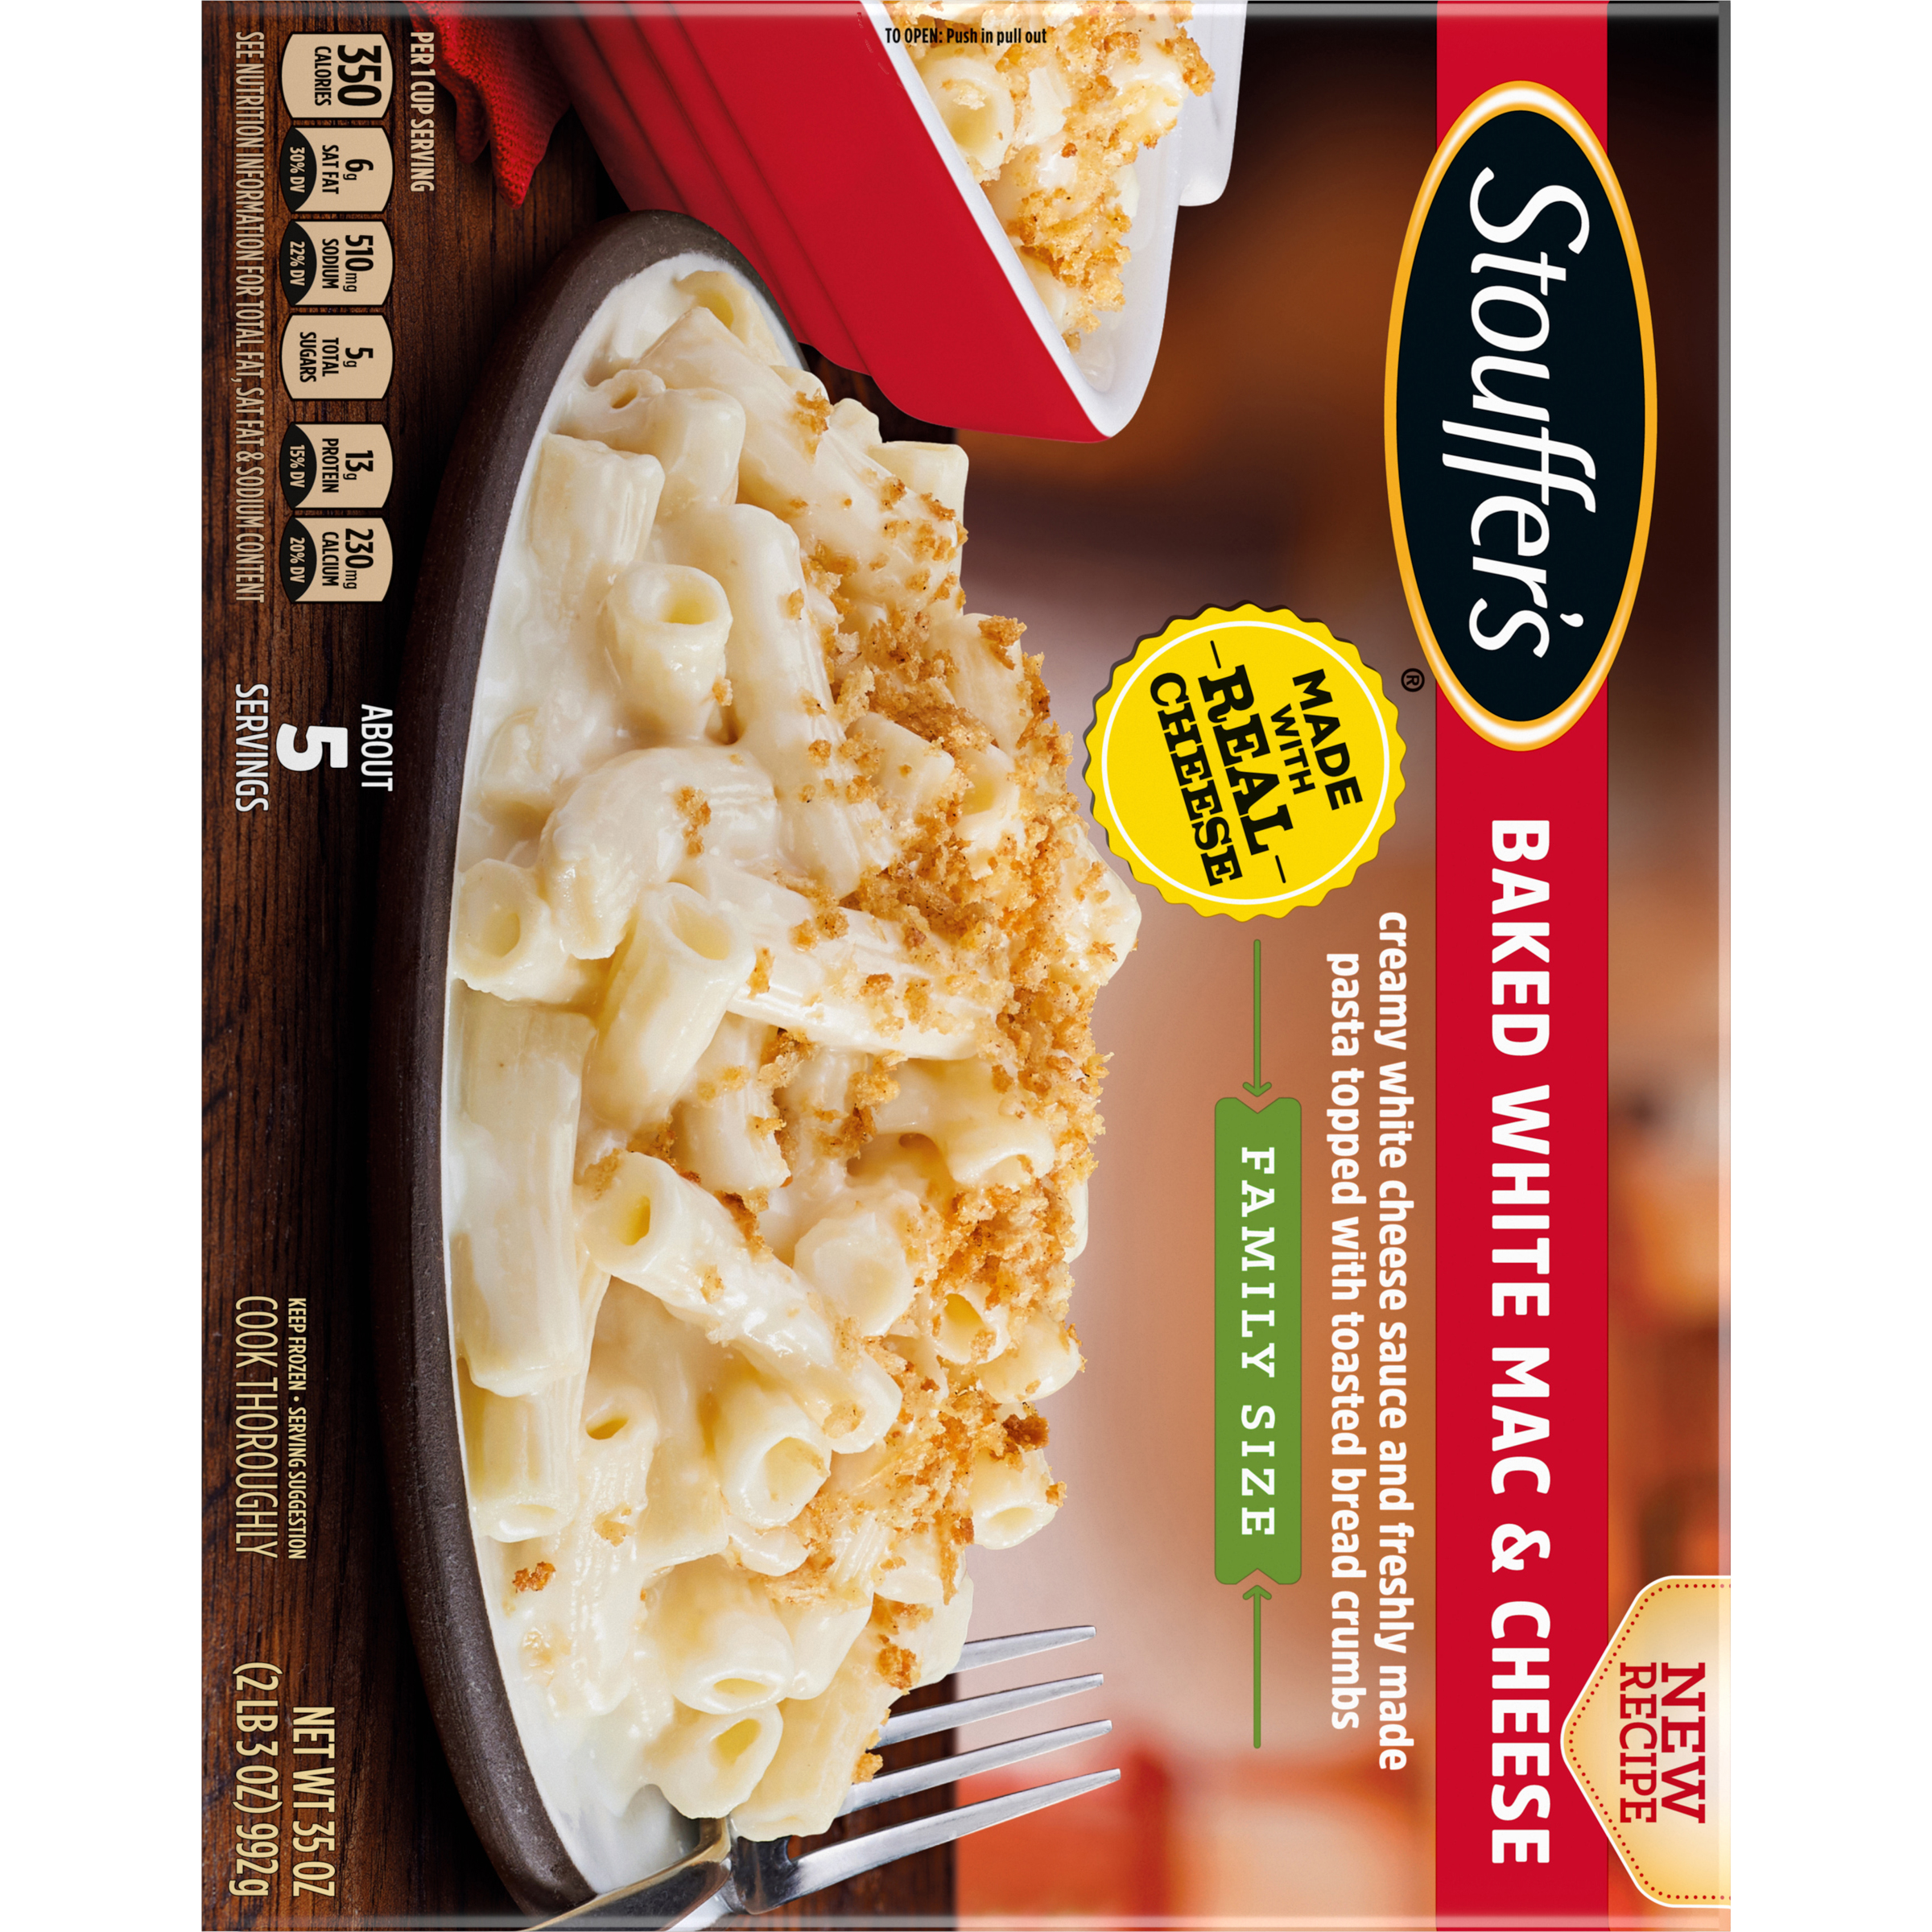 STOUFFER'S Baked White Mac & Cheese (Family Size) 6 units per case 35.0 oz